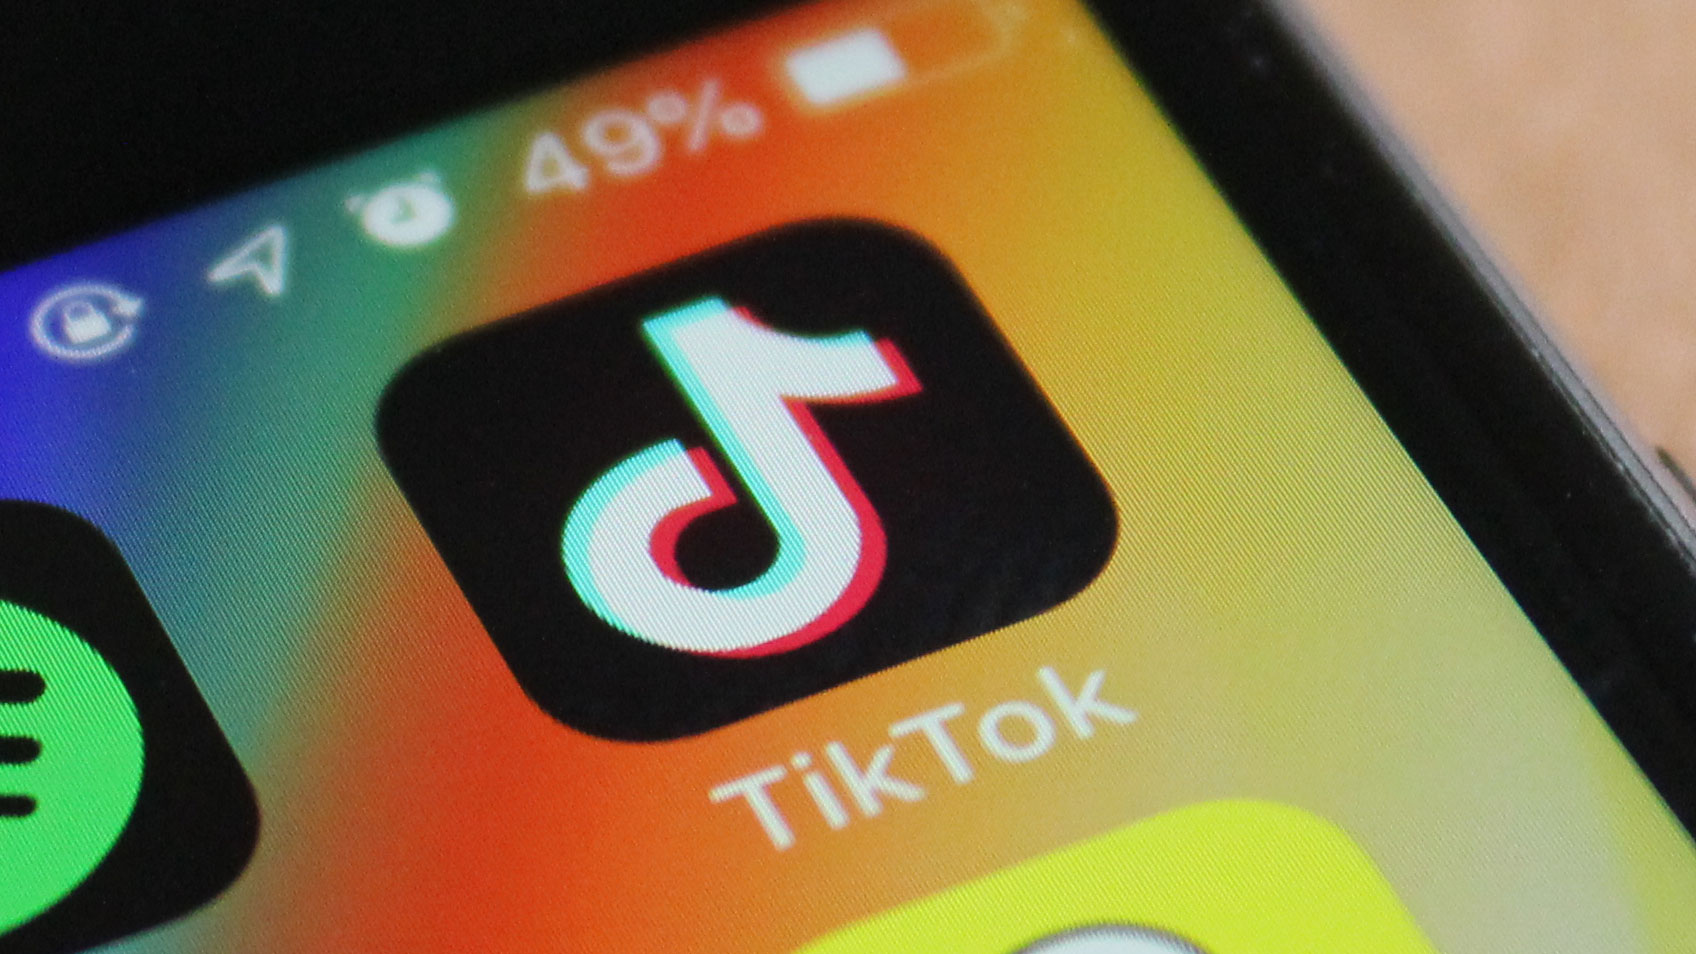 TikTok update will change privacy settings and defaults for users under 18  | TechCrunch